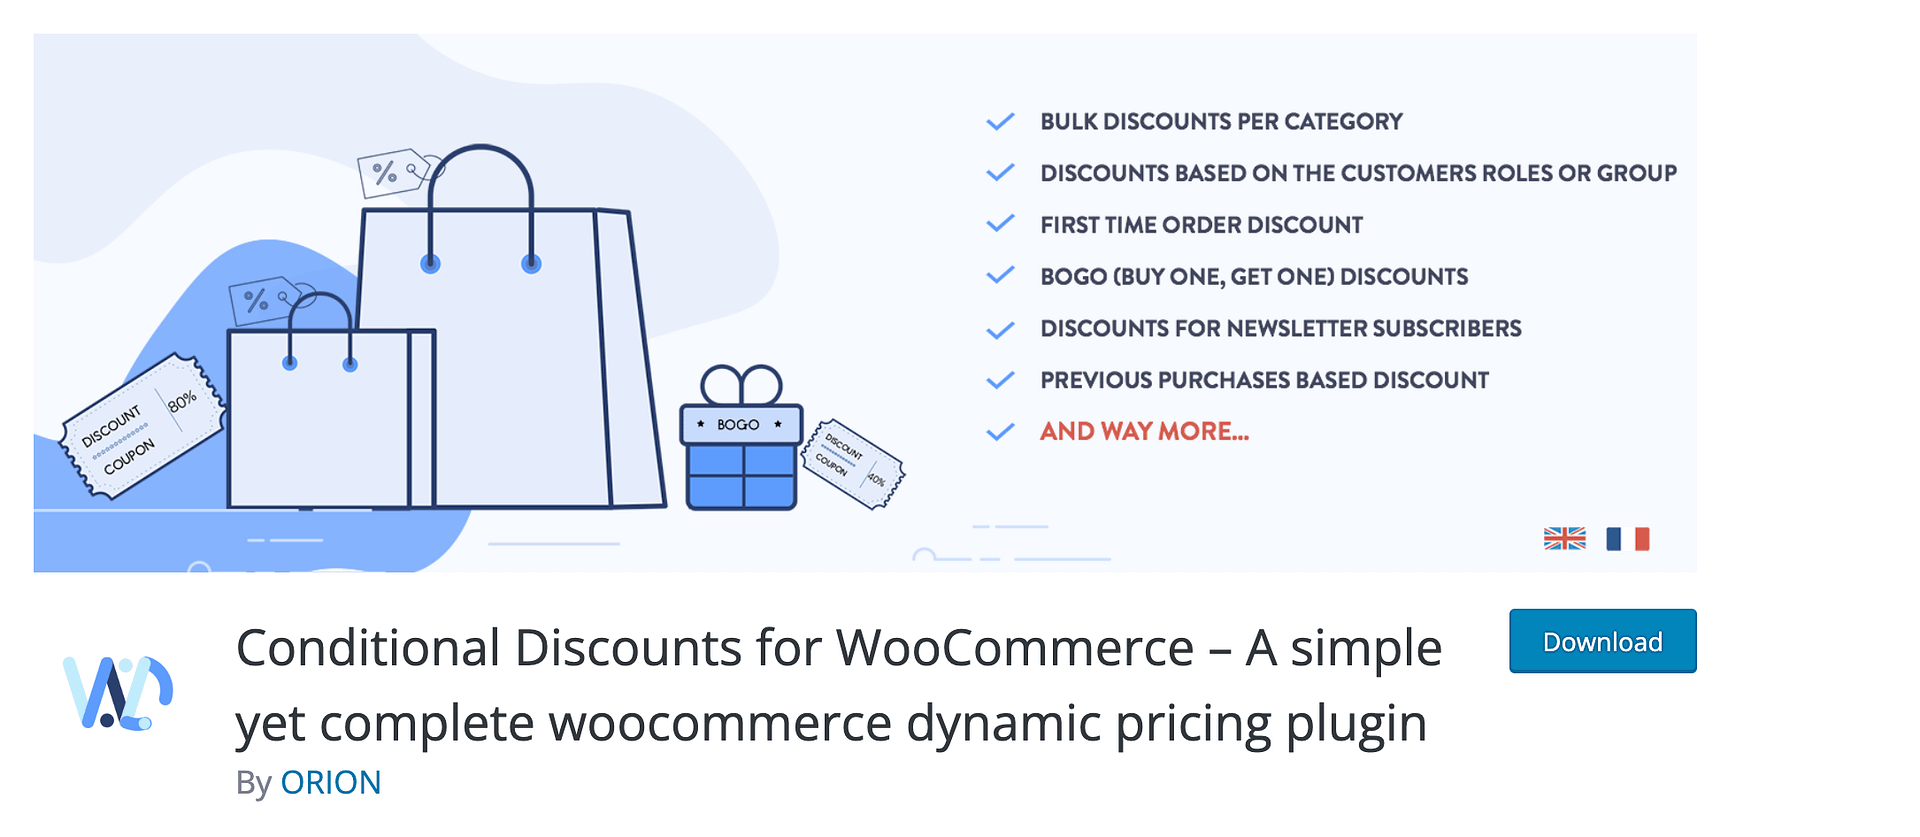 Conditional Discounts for Woocommerce